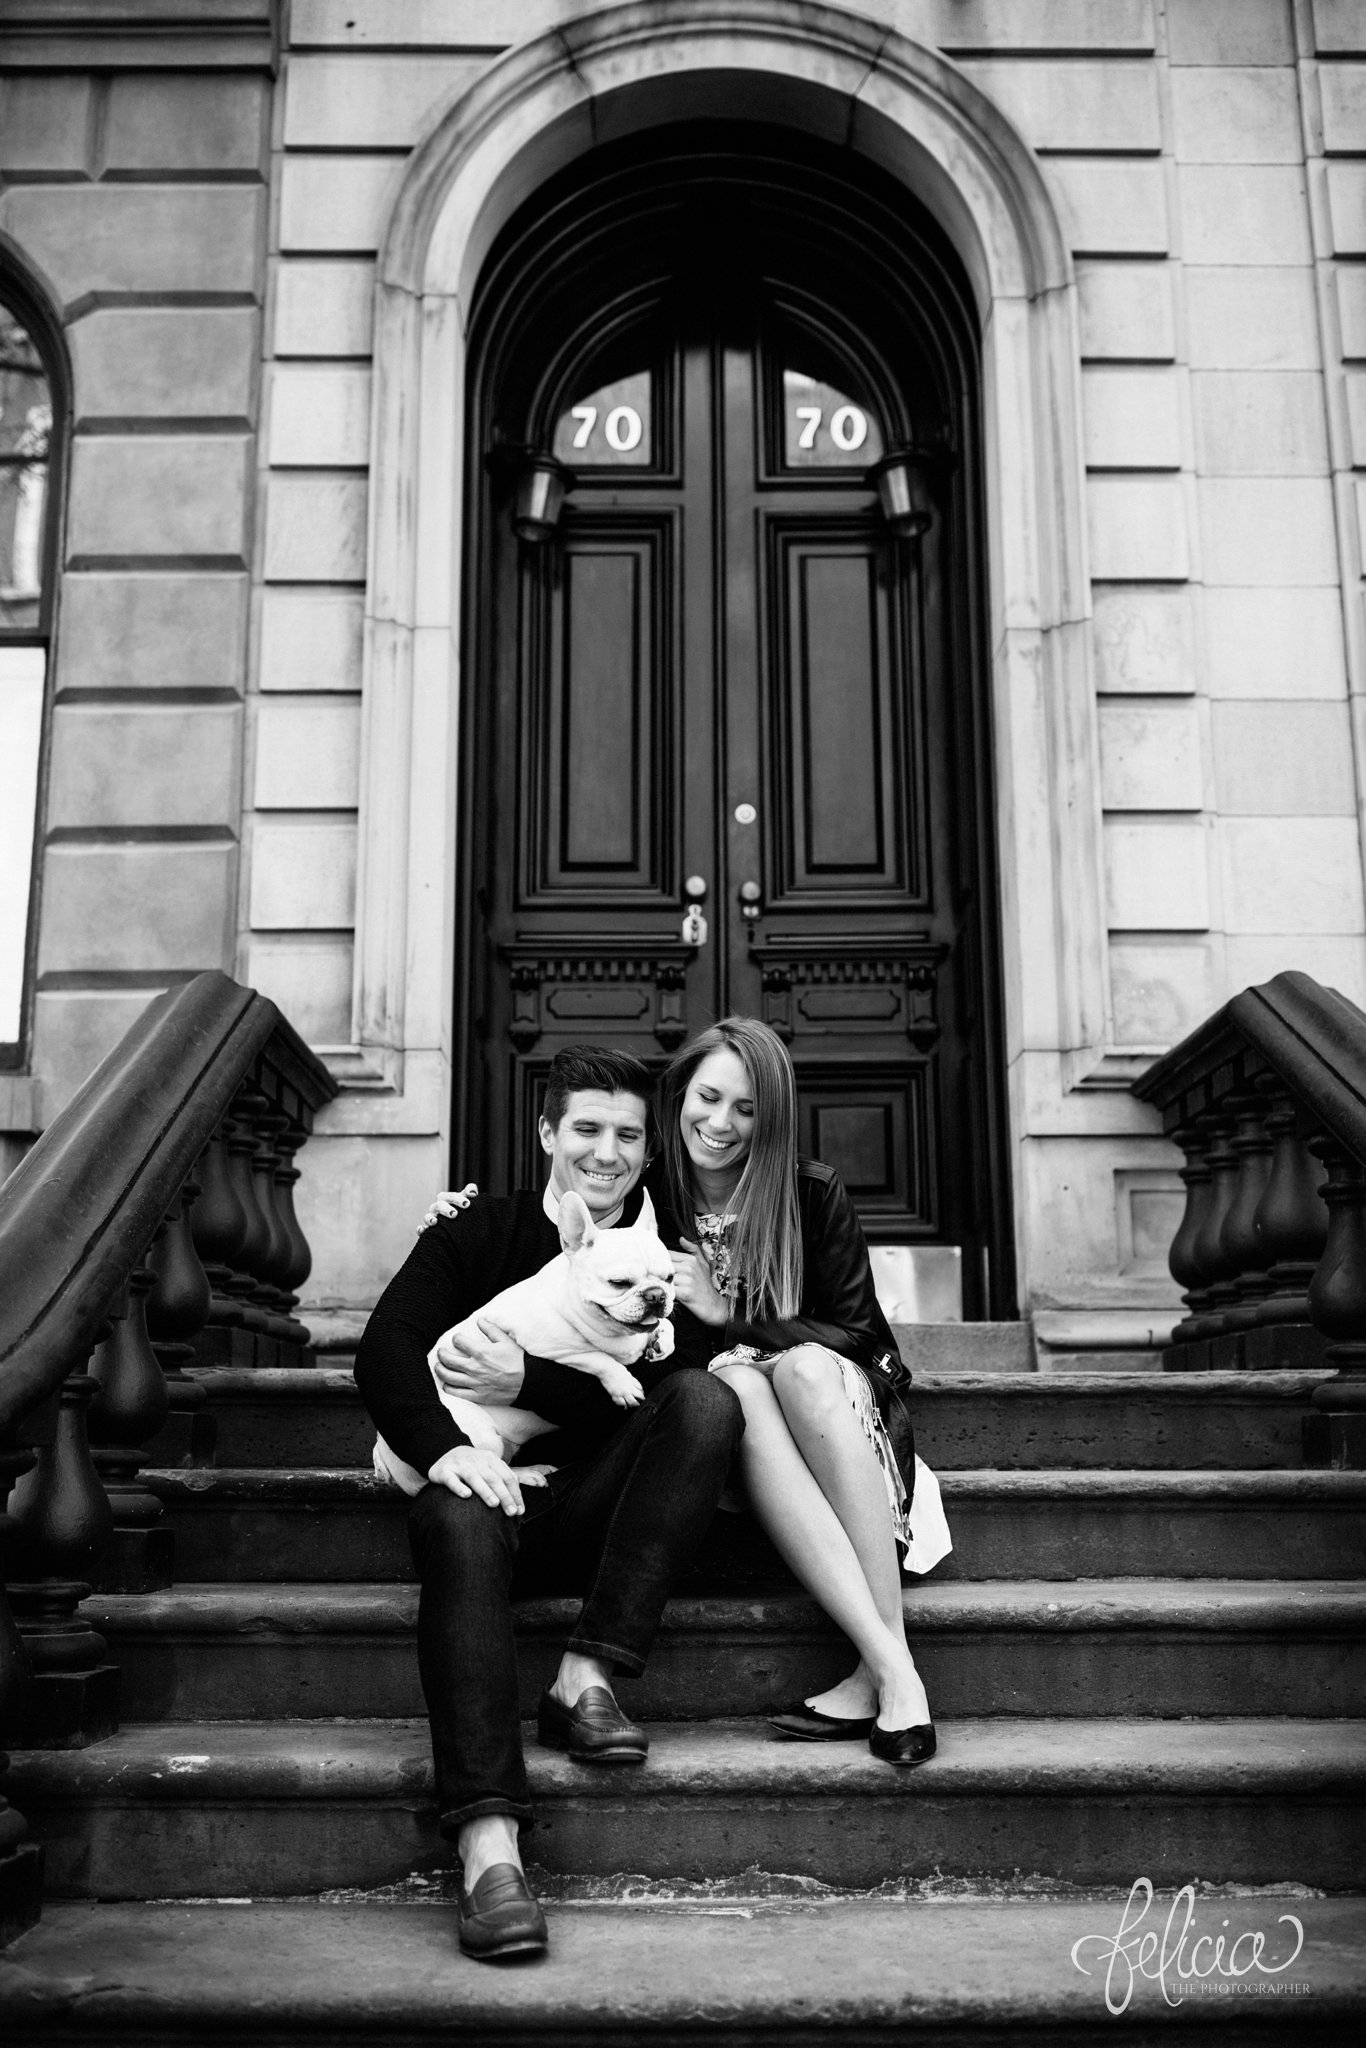 wedding | New York City | West Village | New York City photography | wedding photography | images by feliciathephotographer.com | engagement photos | engagement pictures in New York City | stairwell | French Bulldog | engagement photos with dog | romantic engagement photos | ring photography | candid | black and white | doorway | arched door frame 